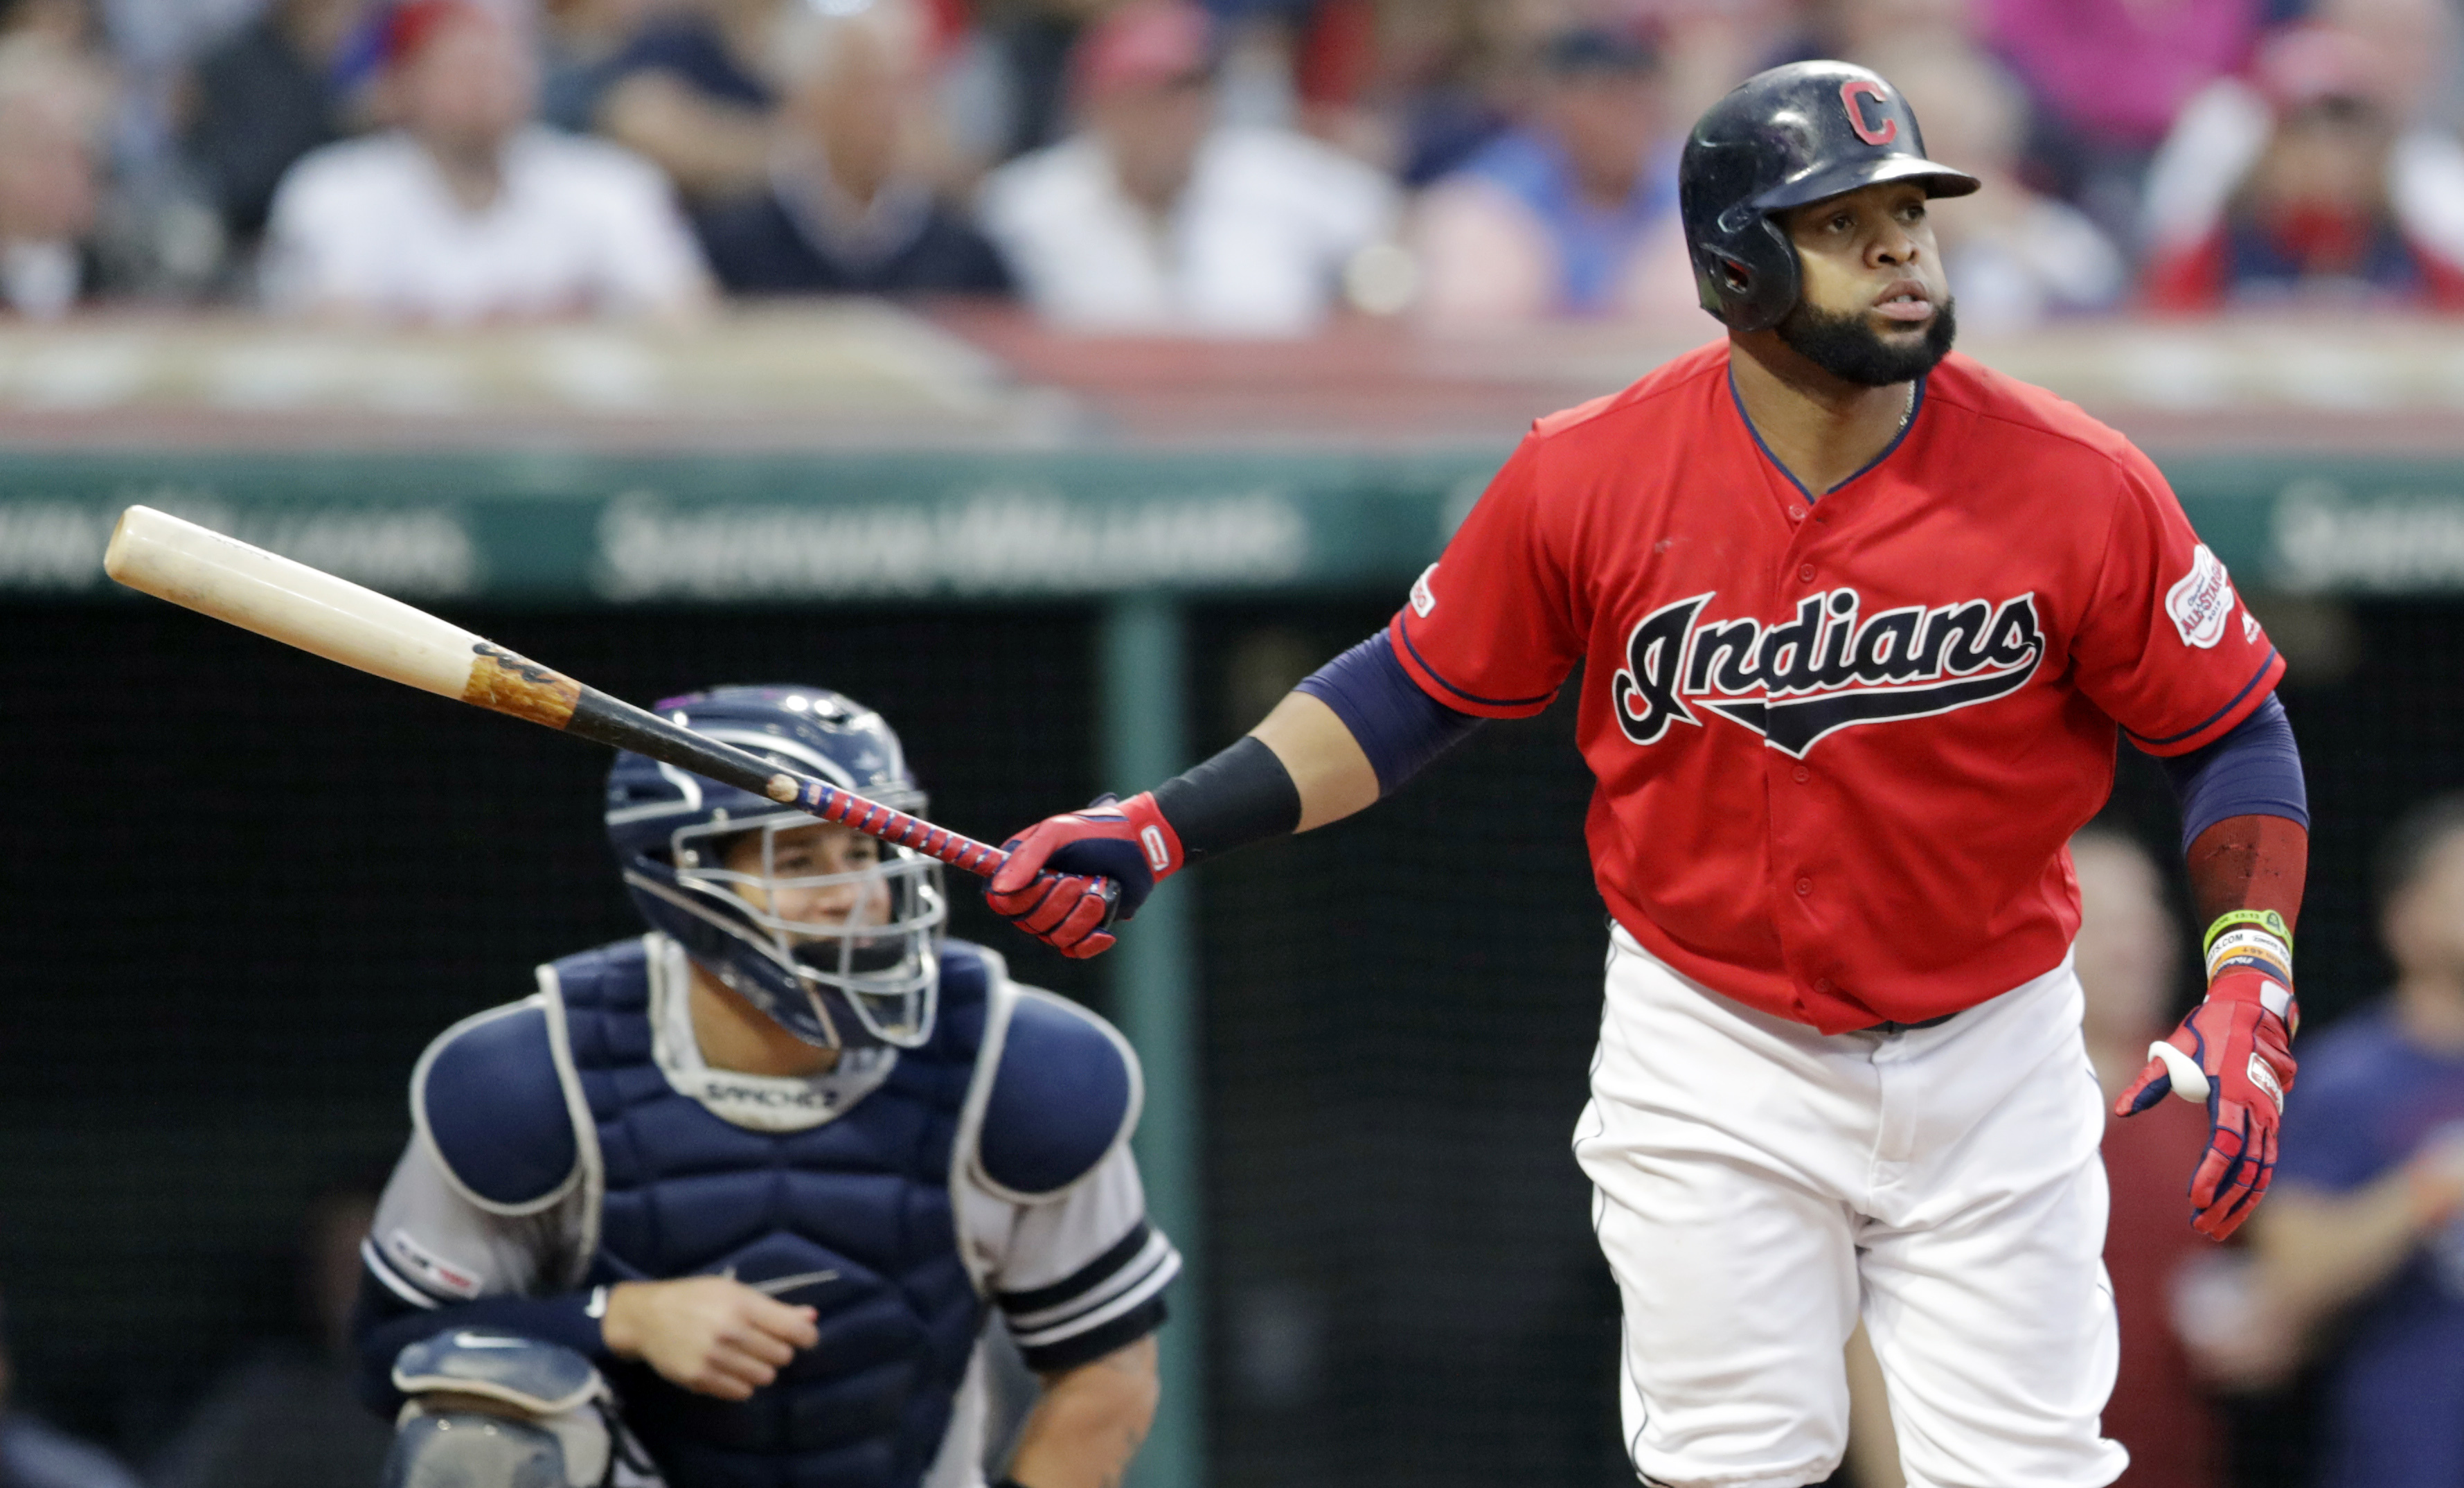 Cleveland Indians' Carlos Santana will start at first base for the